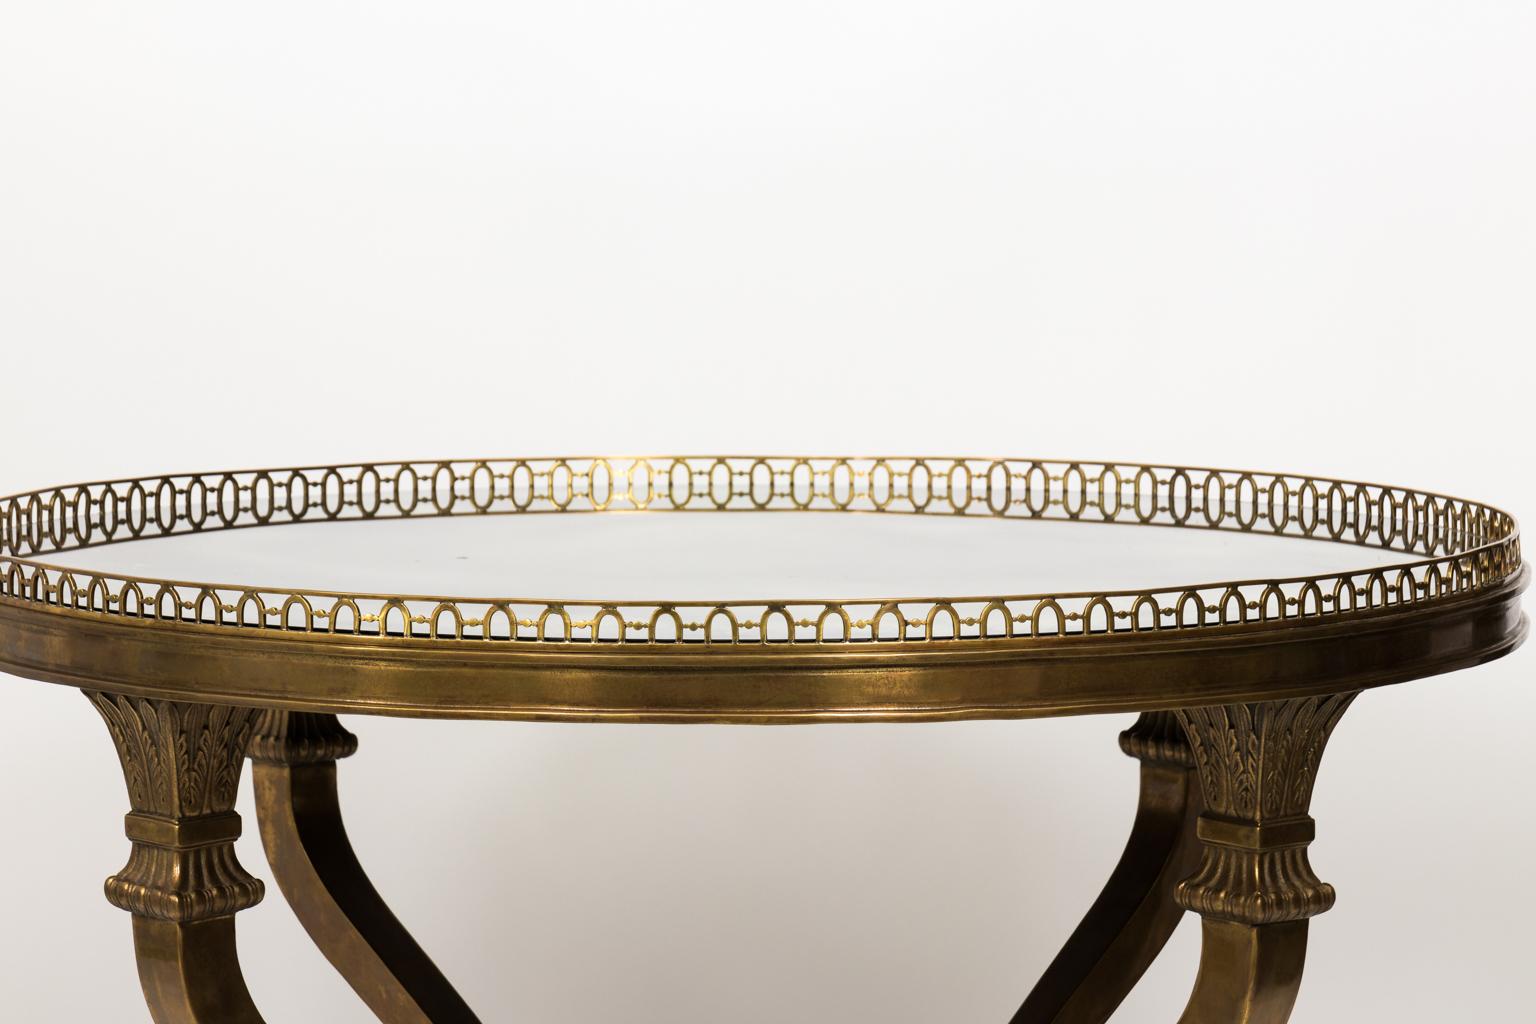 20th Century Neoclassical Bronze Centre Table with Mirrored Top